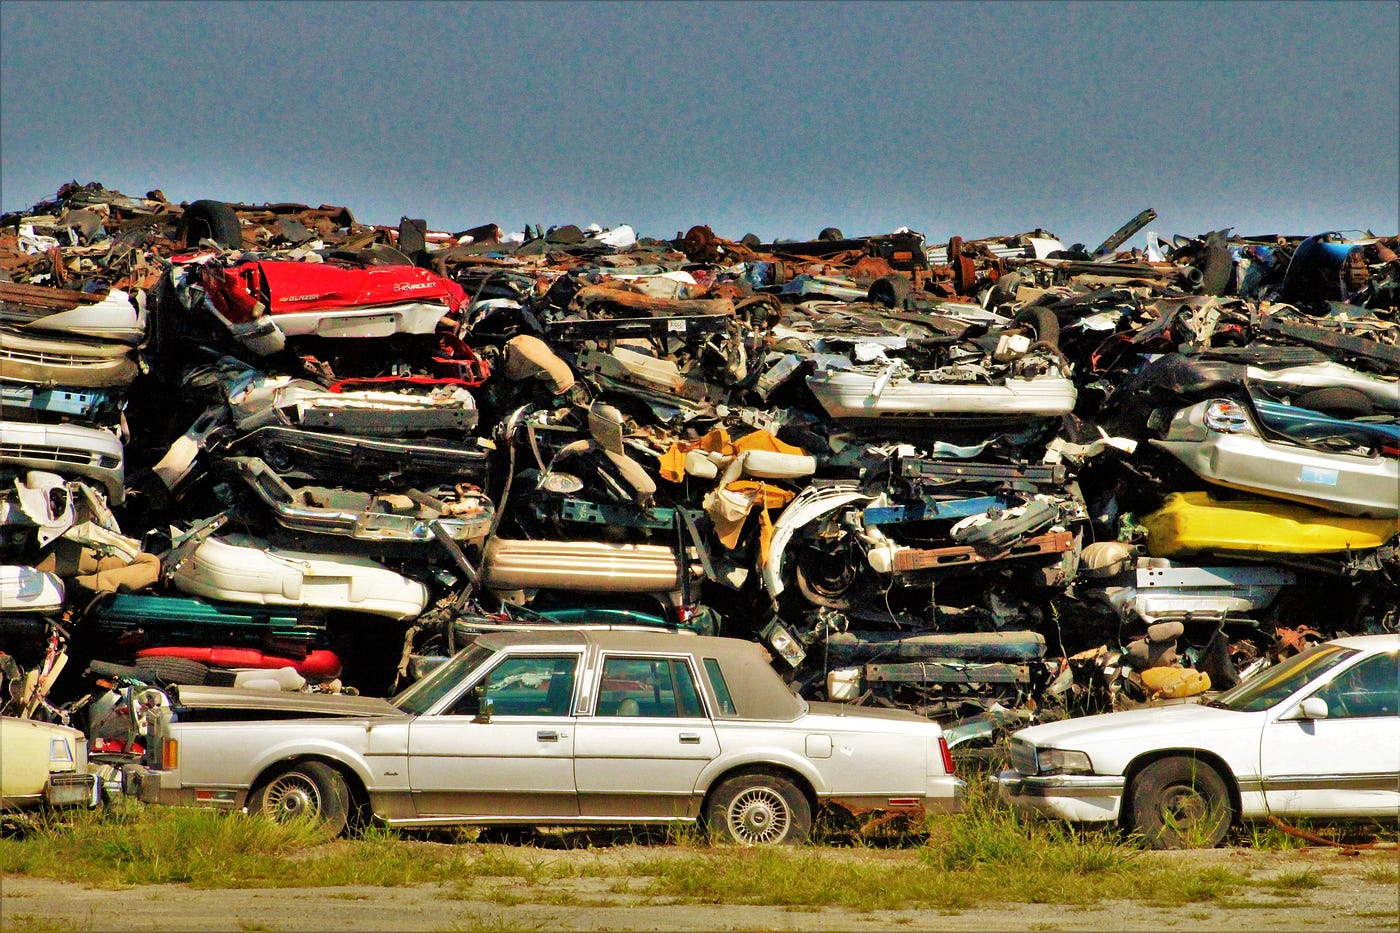 Hemet! Get Instant Cash for Your Junk Car - No Hassle with Cash for Cars Quick!